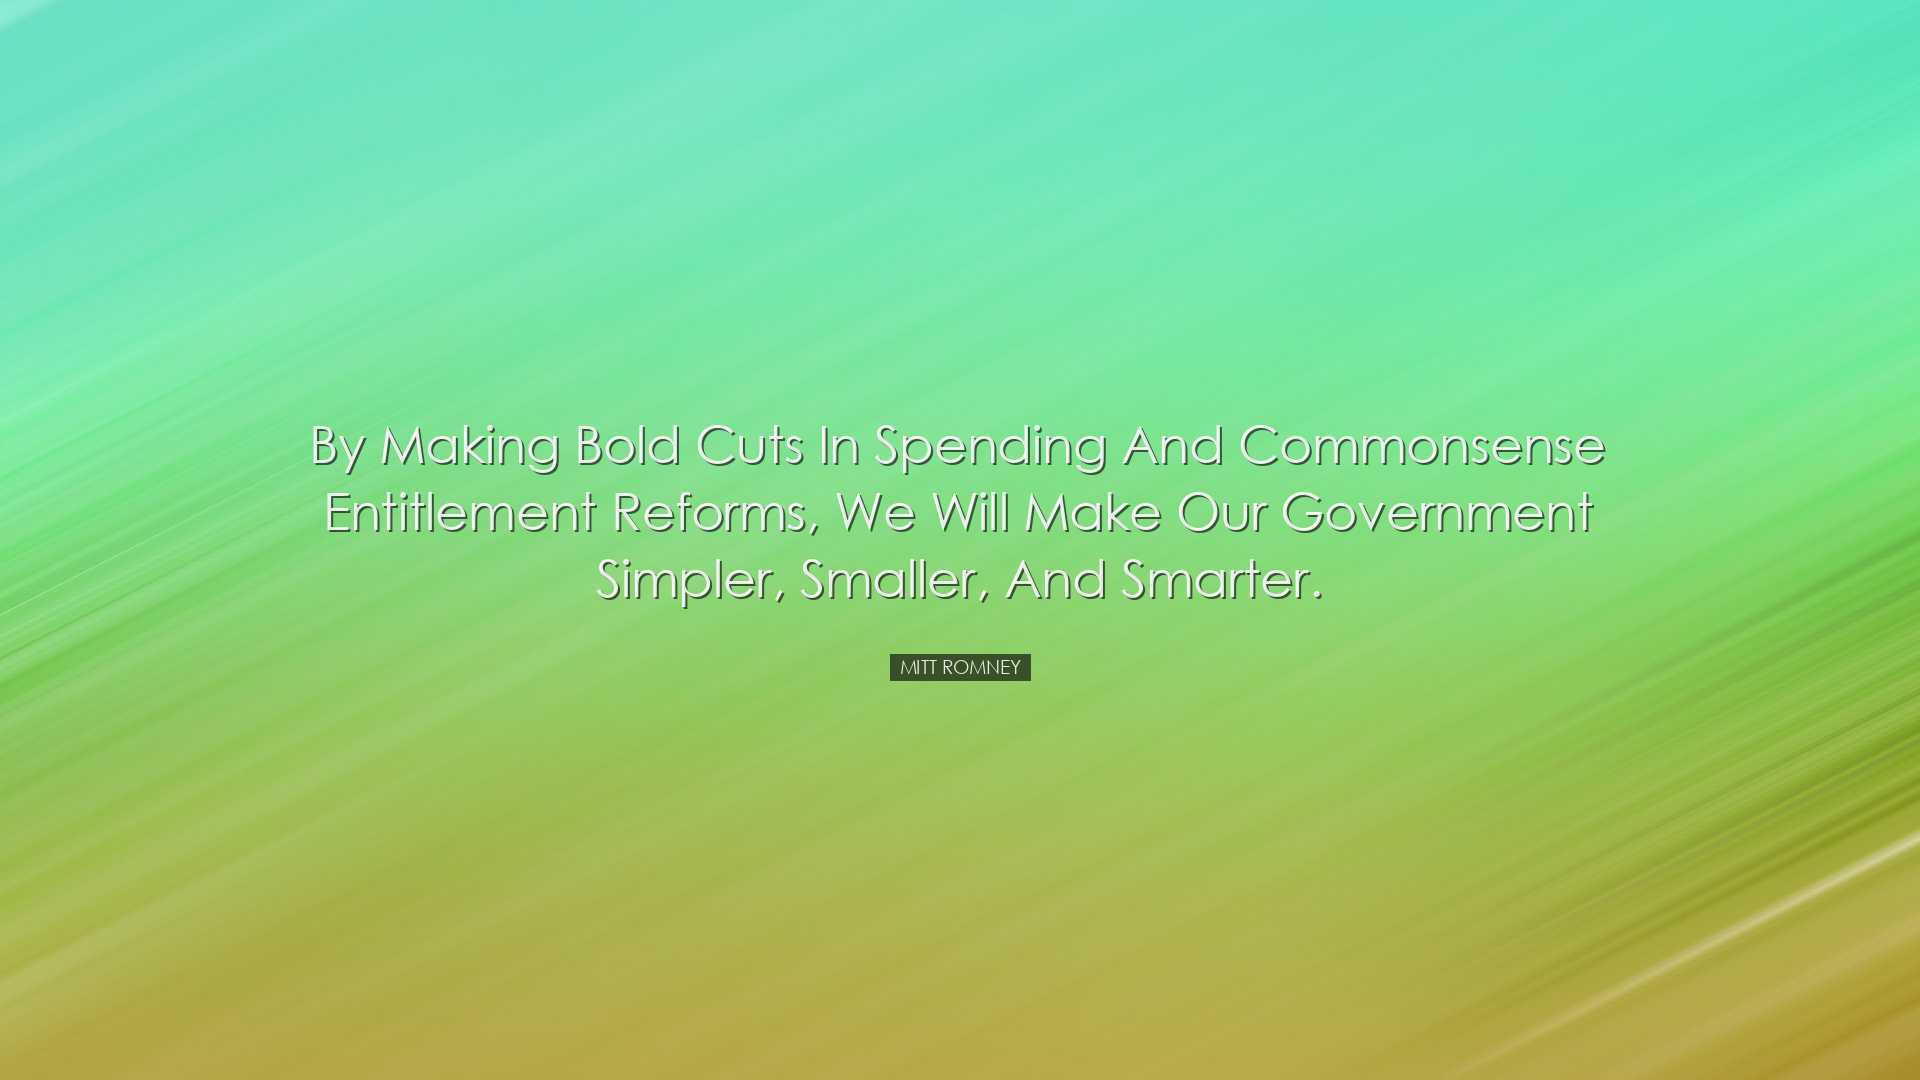 By making bold cuts in spending and commonsense entitlement reform